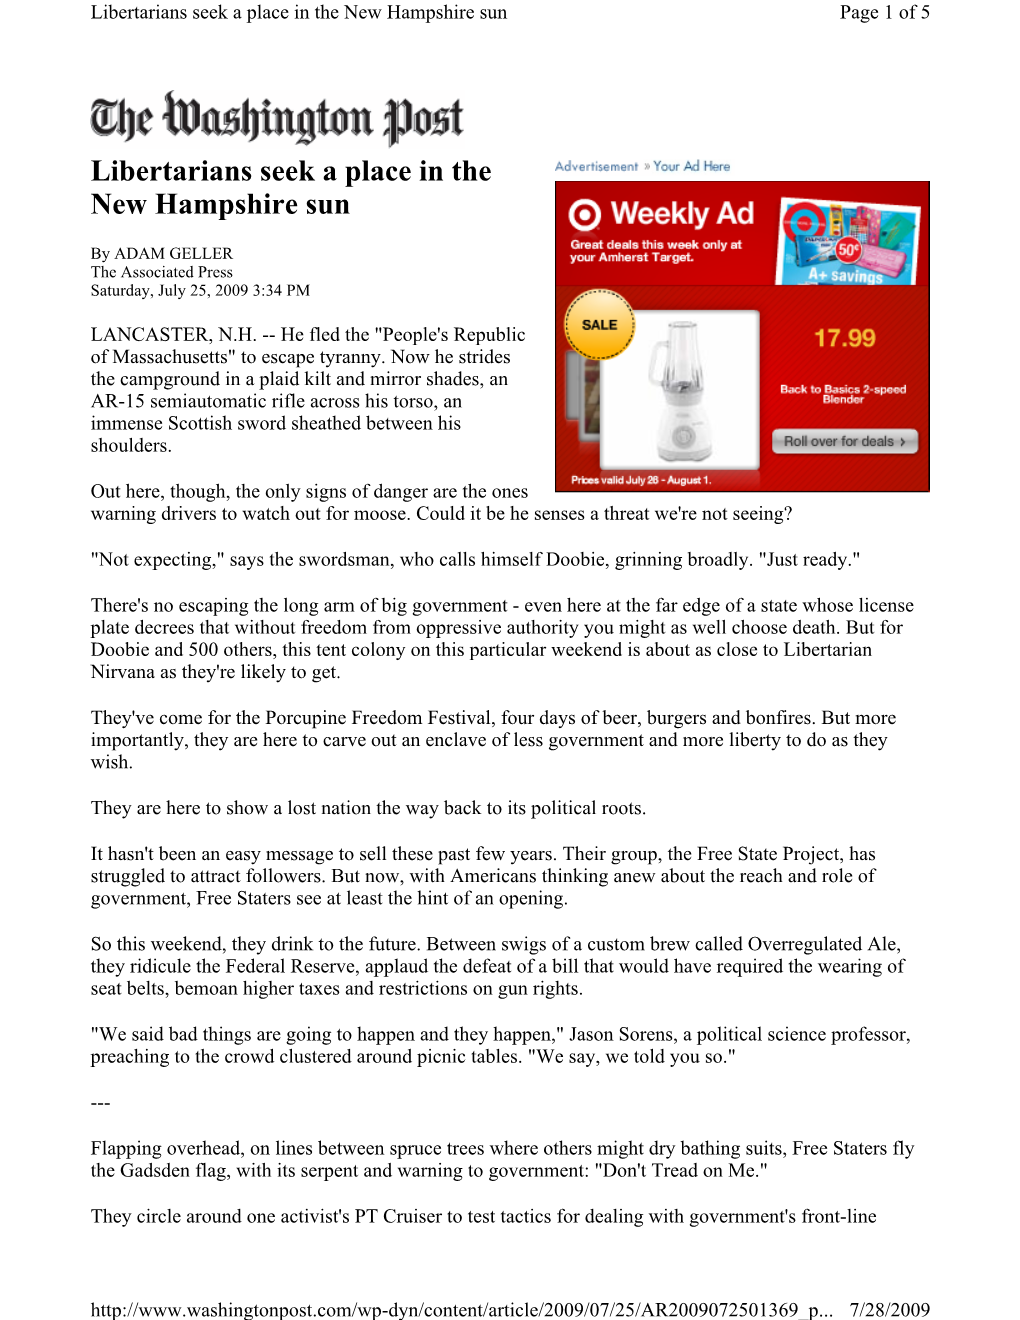 Libertarians Seek a Place in the New Hampshire Sun Page 1 of 5